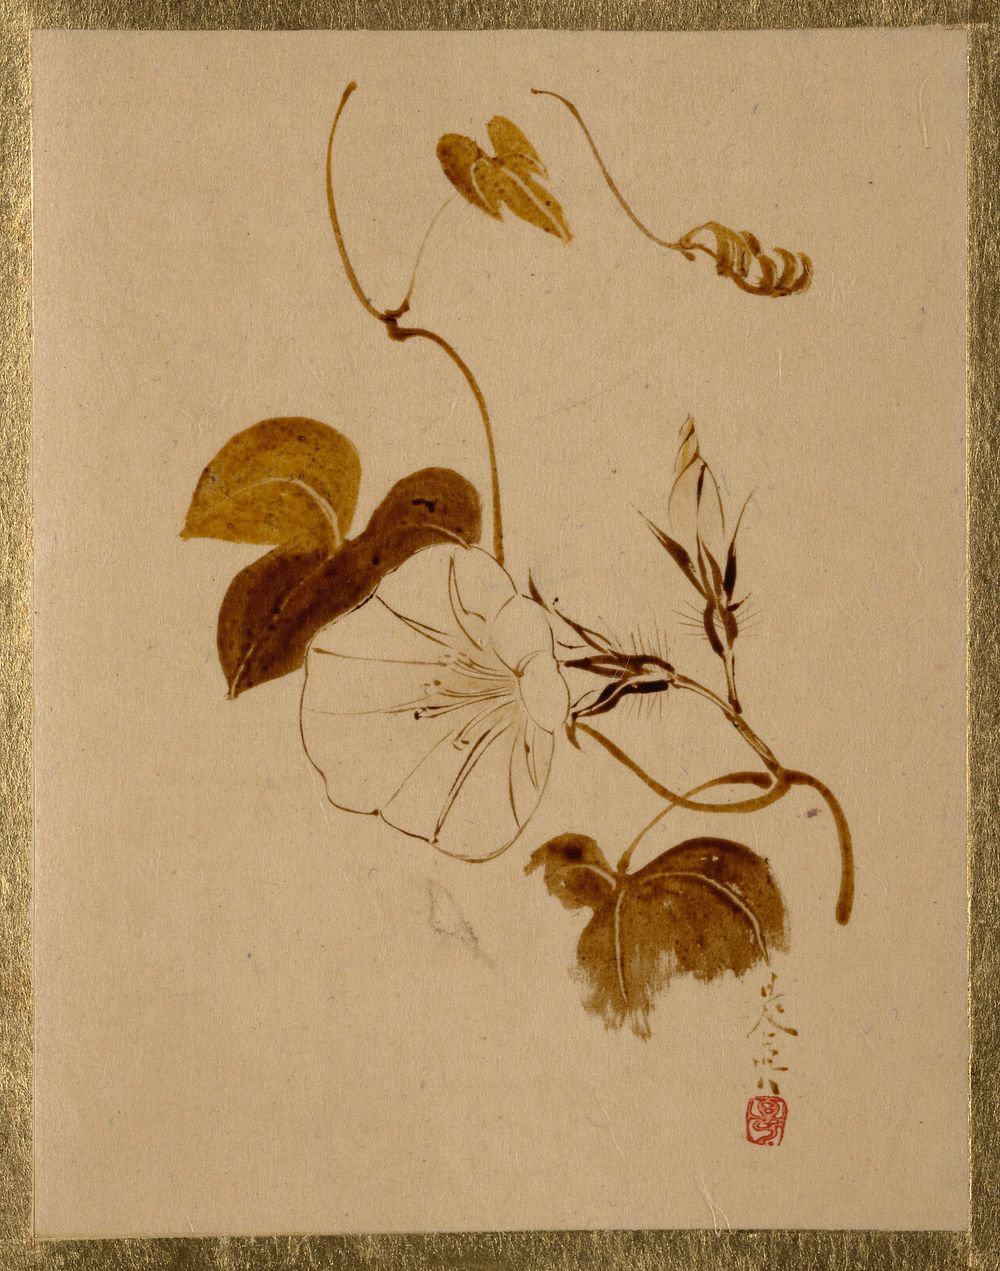 Morning Glory. Original public domain image from the MET museum.